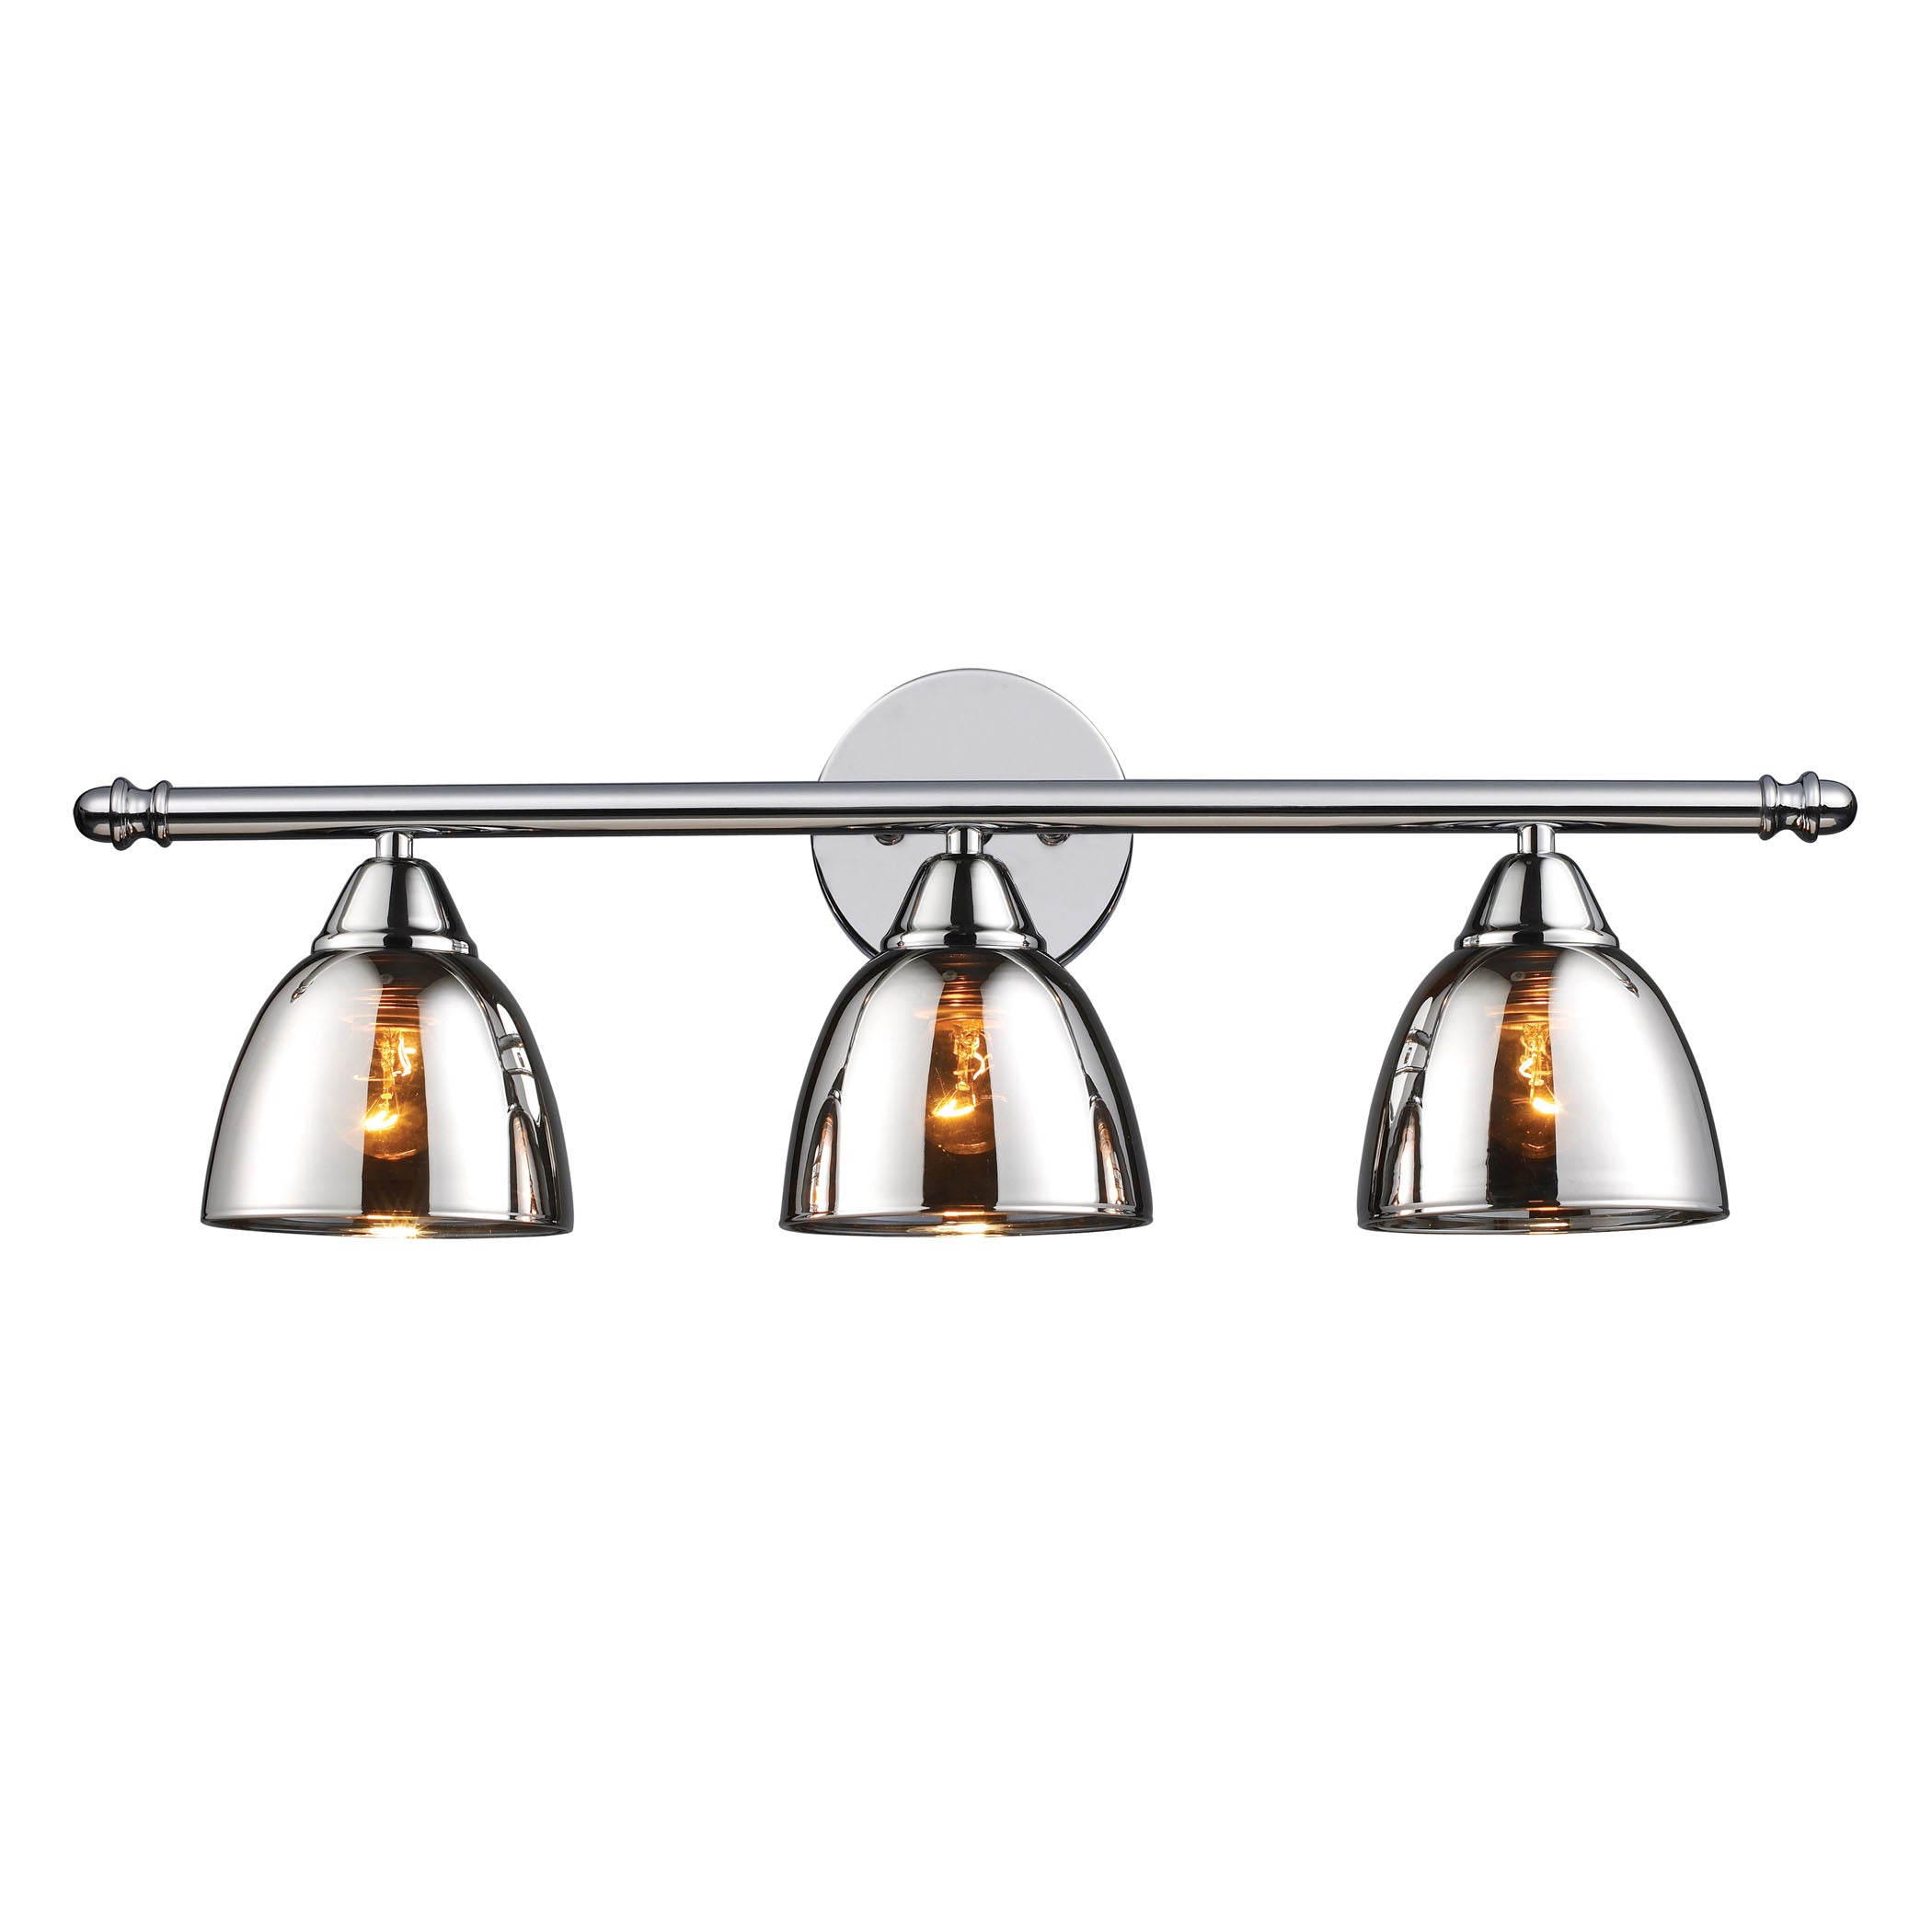 ELK Lighting 10072/3 Reflections 3-Light Vanity Sconce in Polished Chrome with Chrome-plated Glass